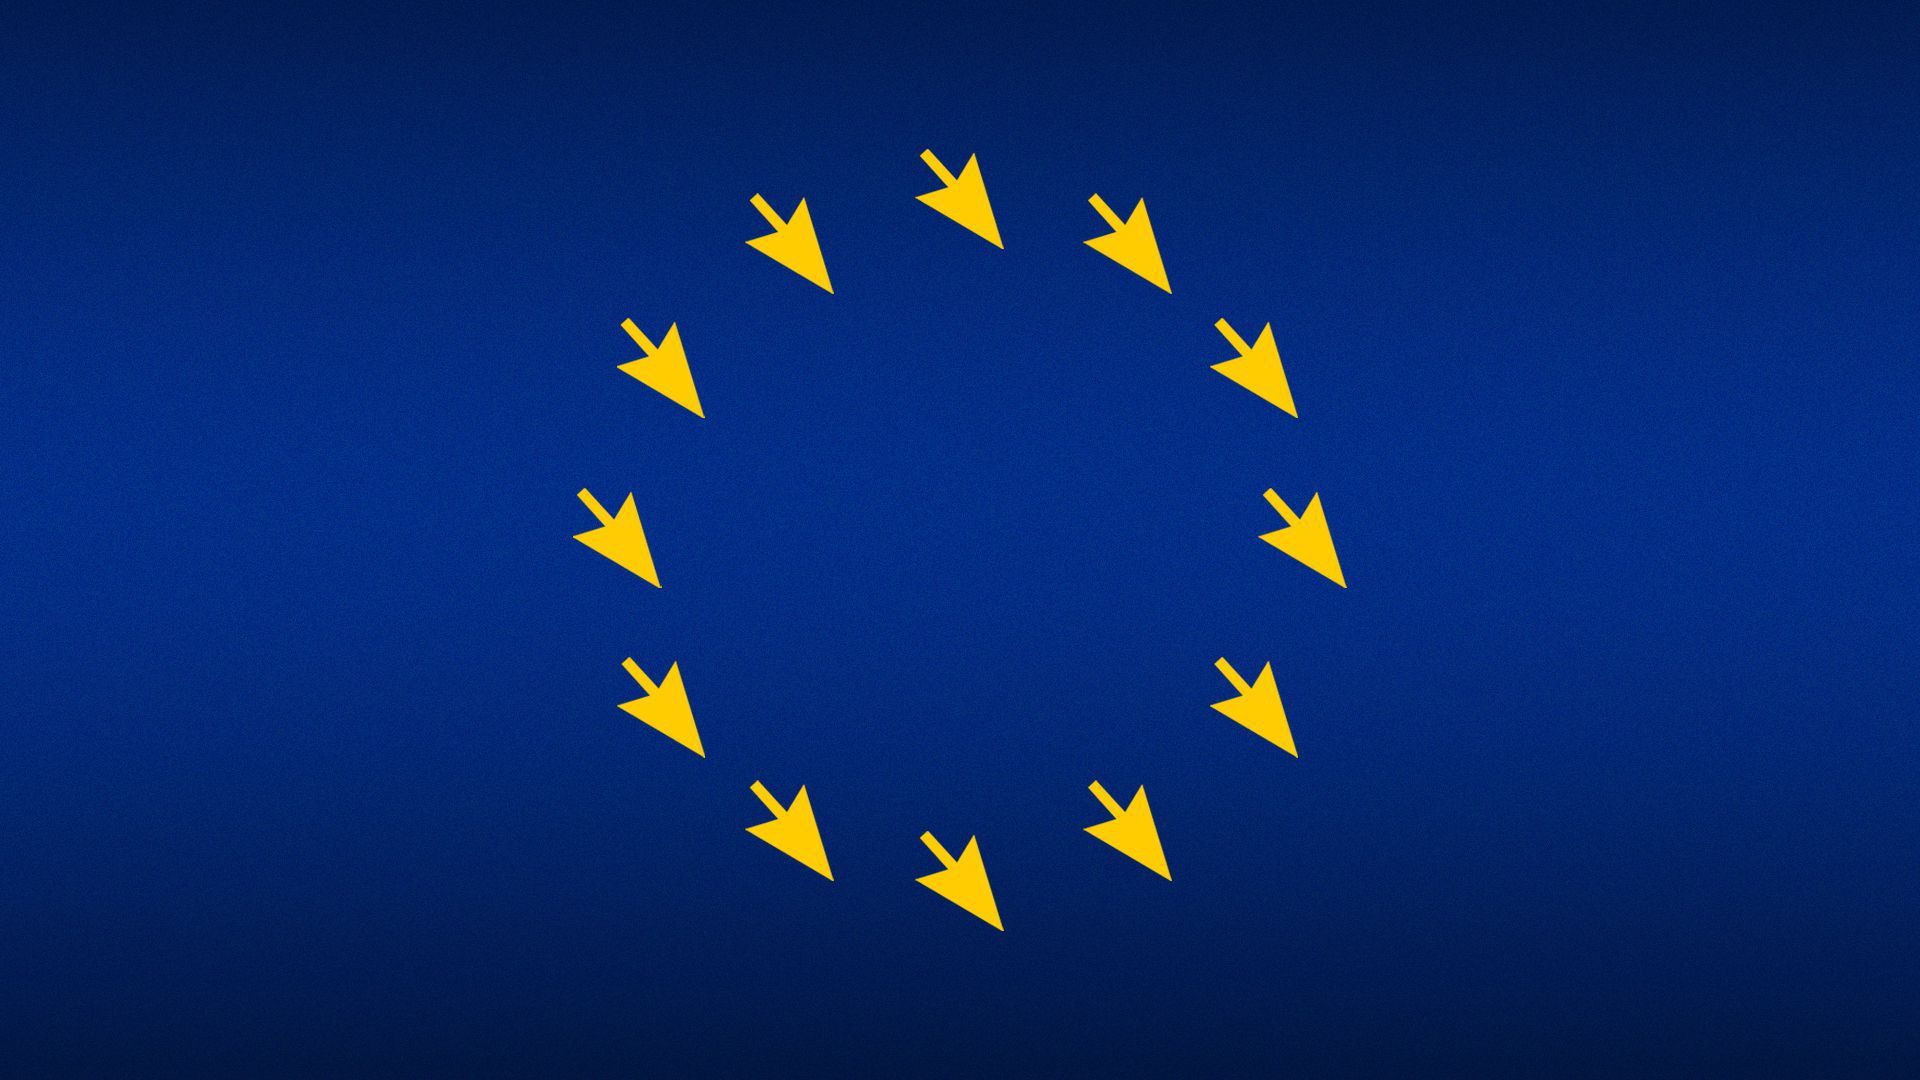 An illustration of the EU flag with yellow cursors replacing the yellow stars